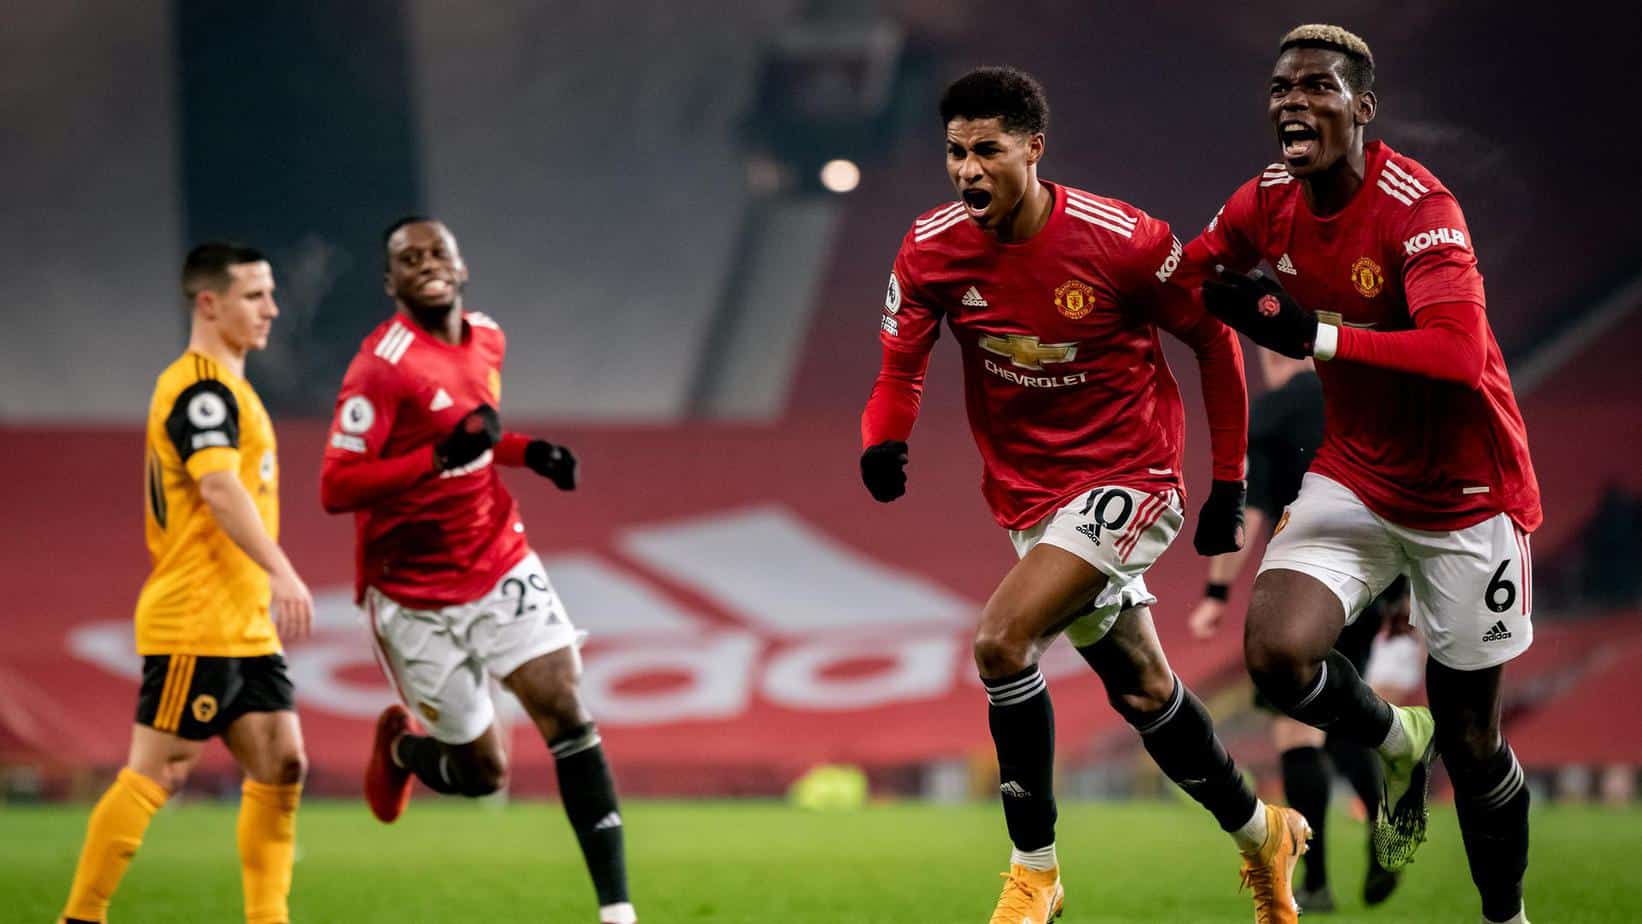 Manchester United vs. Wolves – Predictions and Free Betting Pick